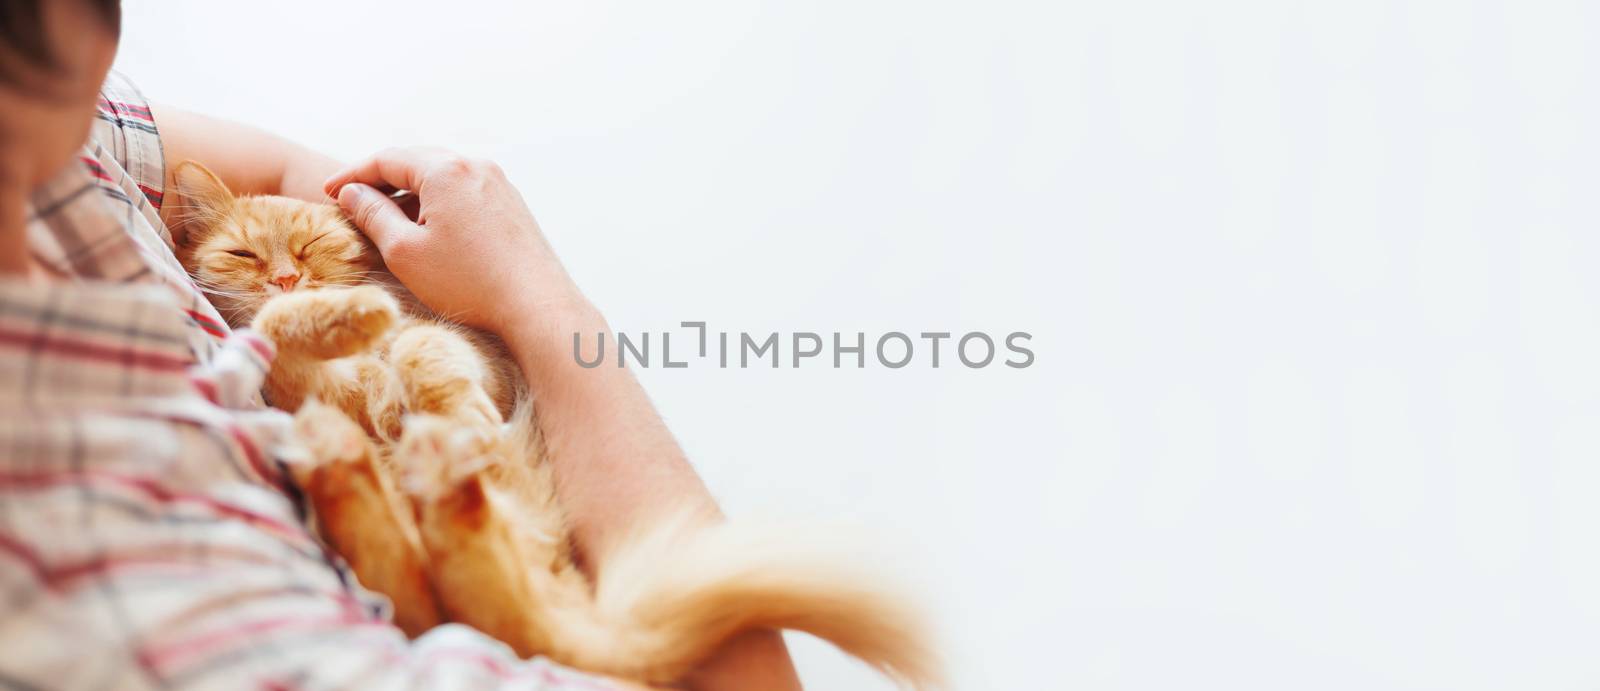 Man hugs cute ginger cat. Human and sleeping pet. White background with place for text.